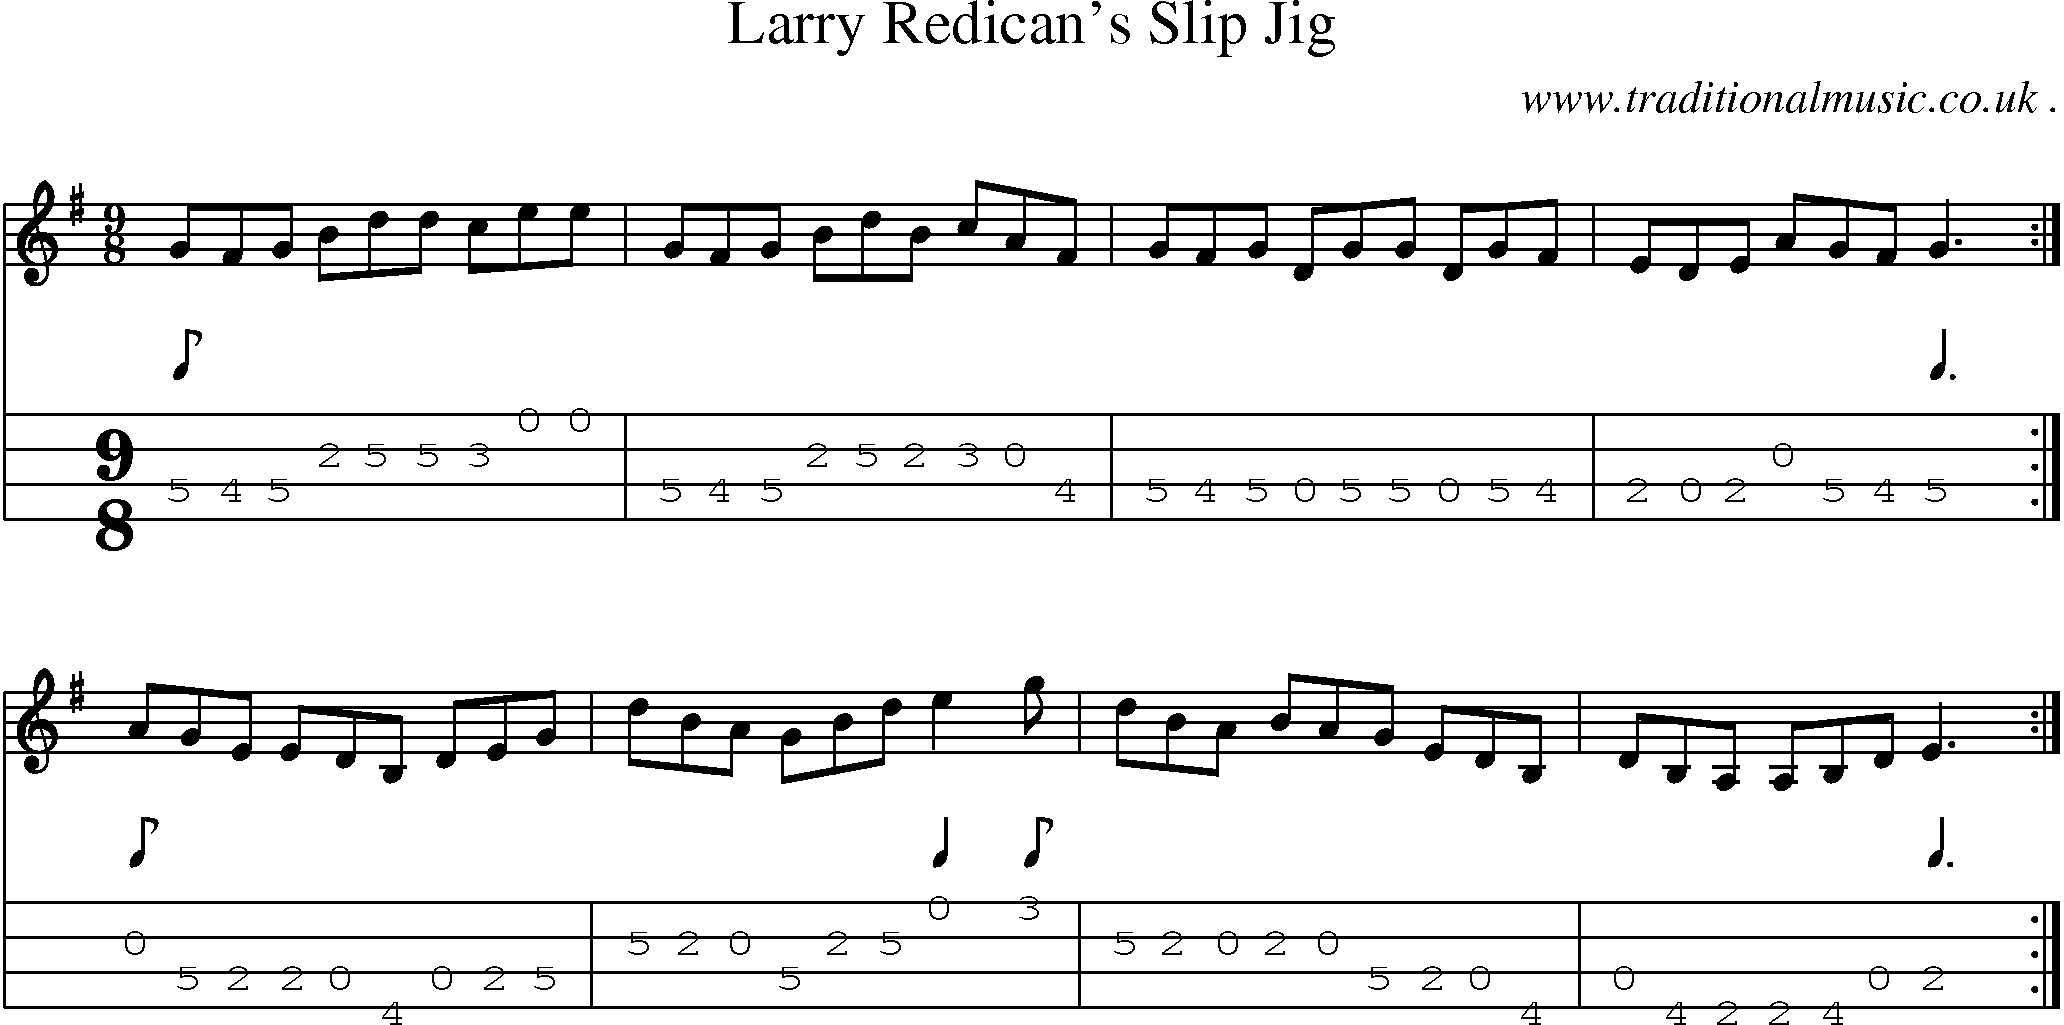 Sheet-music  score, Chords and Mandolin Tabs for Larry Redicans Slip Jig